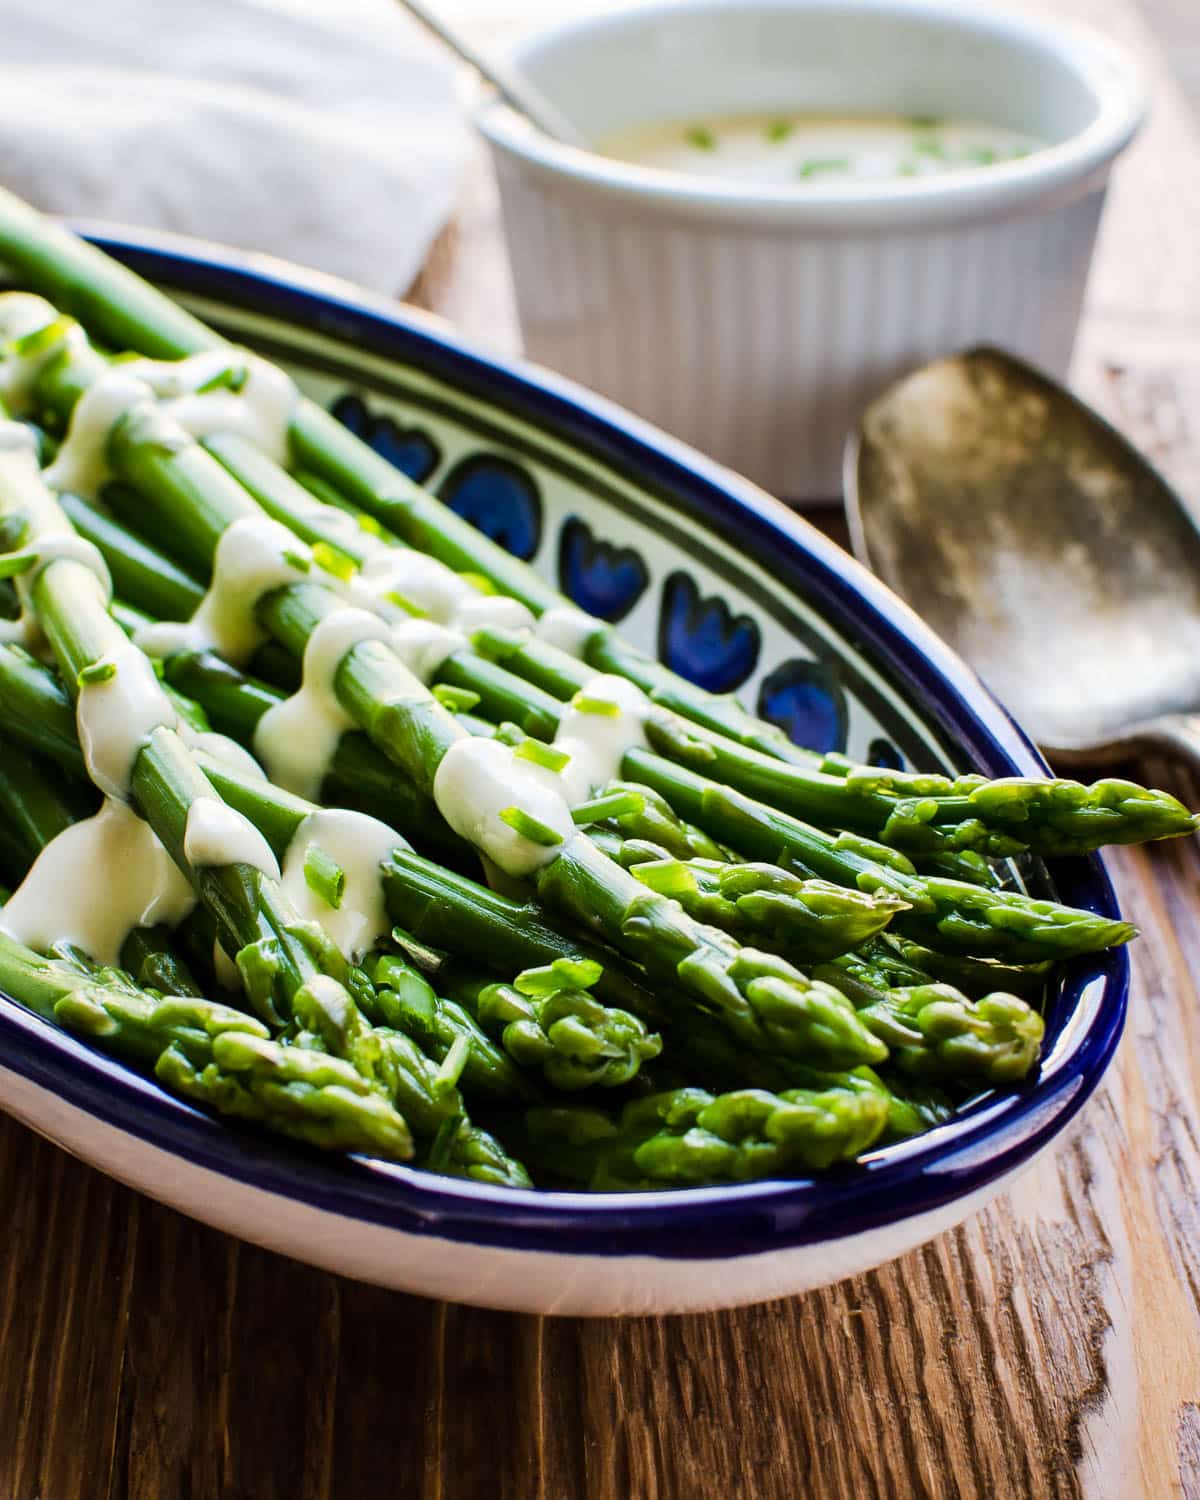 Blanched asparagus with a creamy dijon sauce drizzled over it.